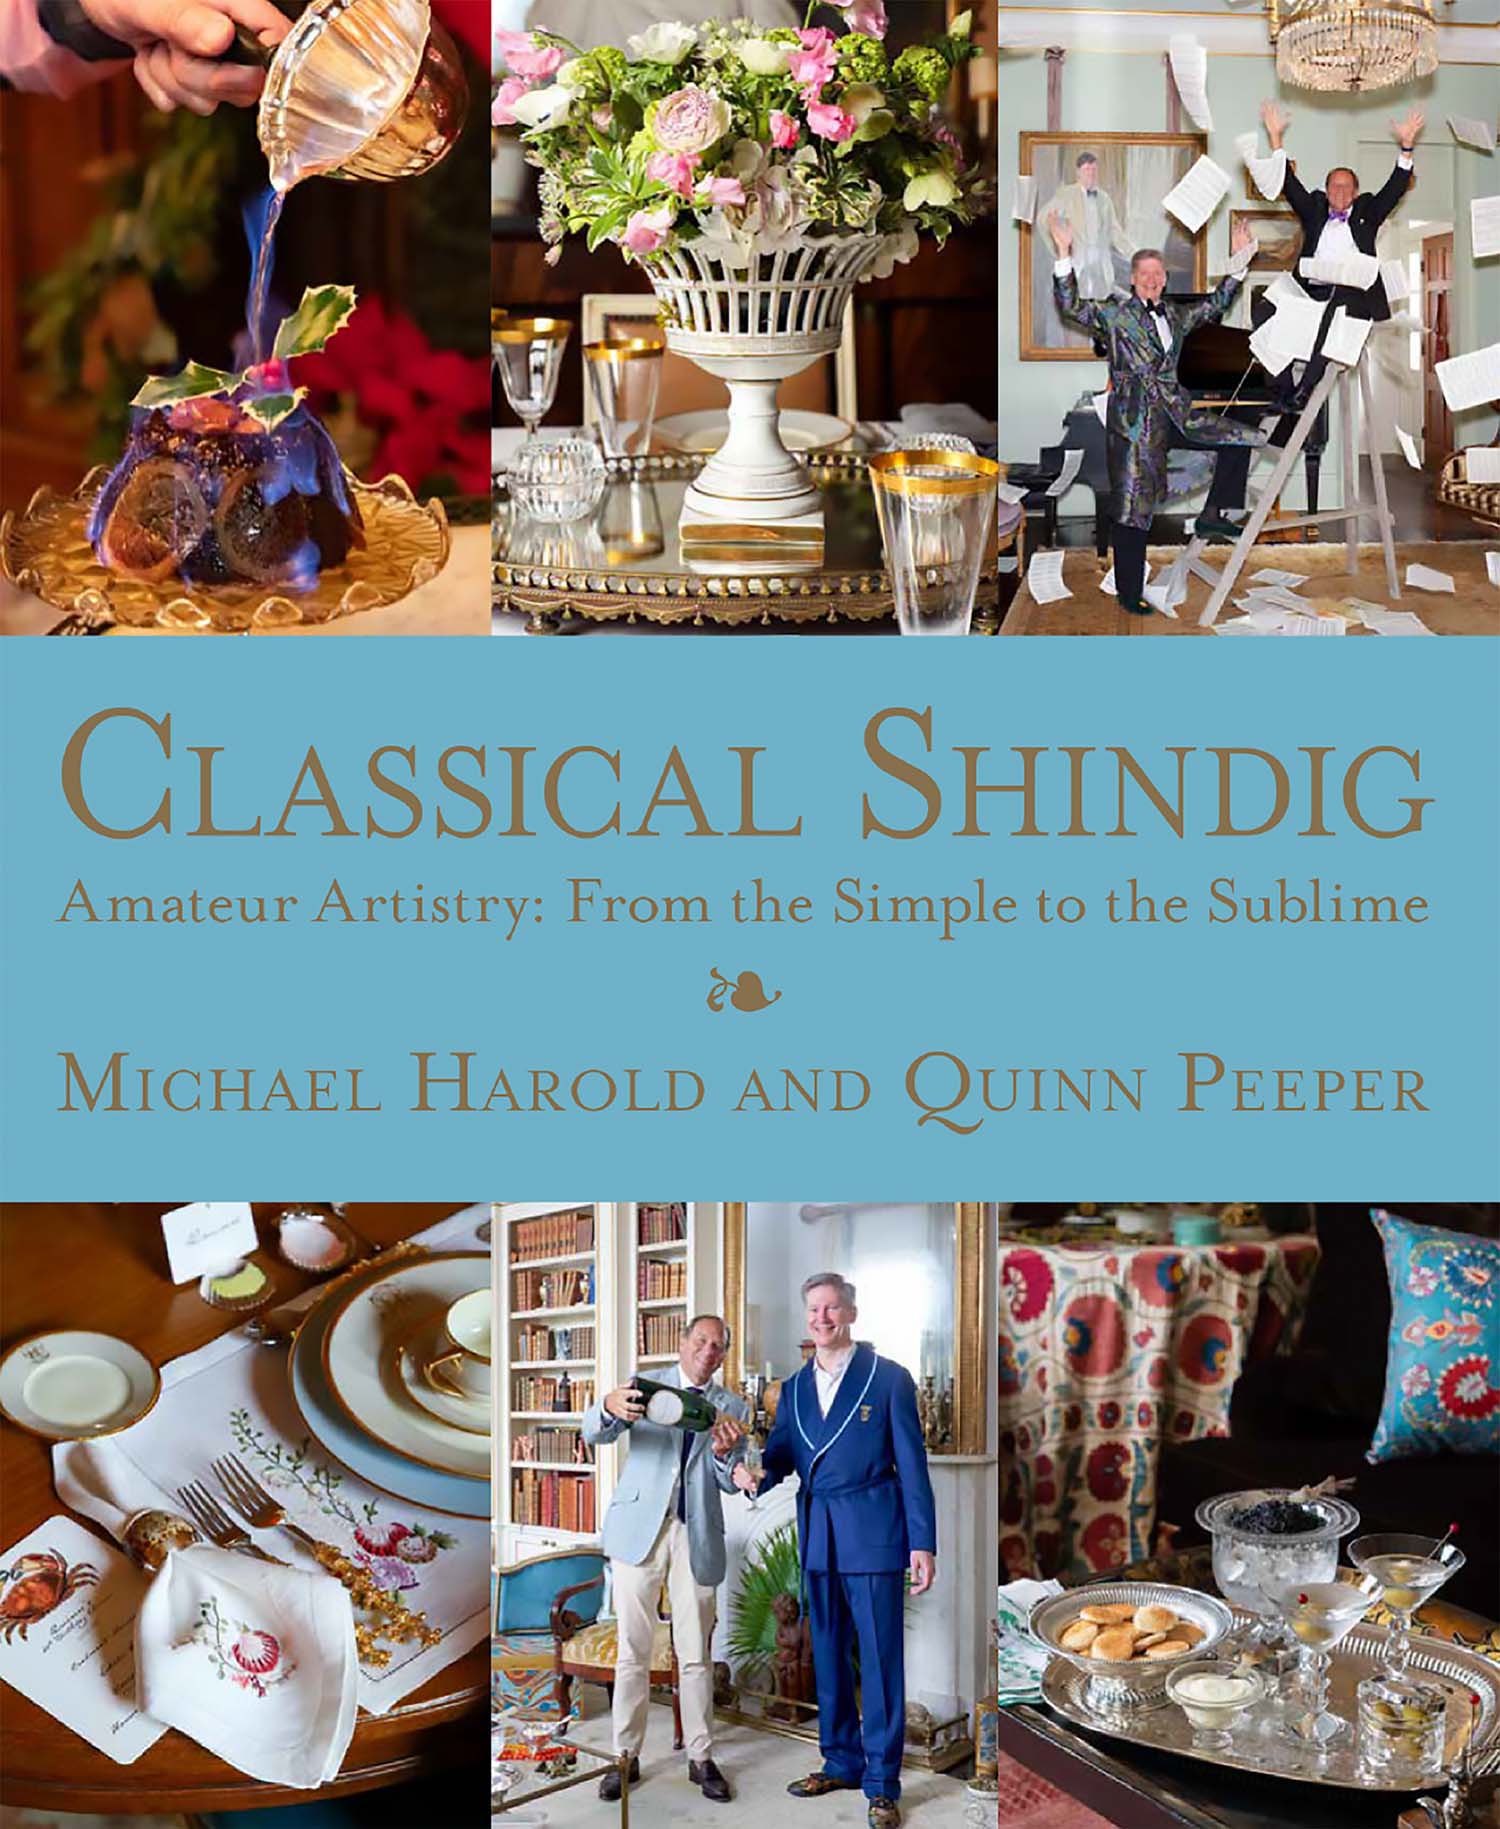 Cover of CLASSICAL SHINDIG with Michael Harold and Quinn Peeper, flowers, food, and tablescapes.